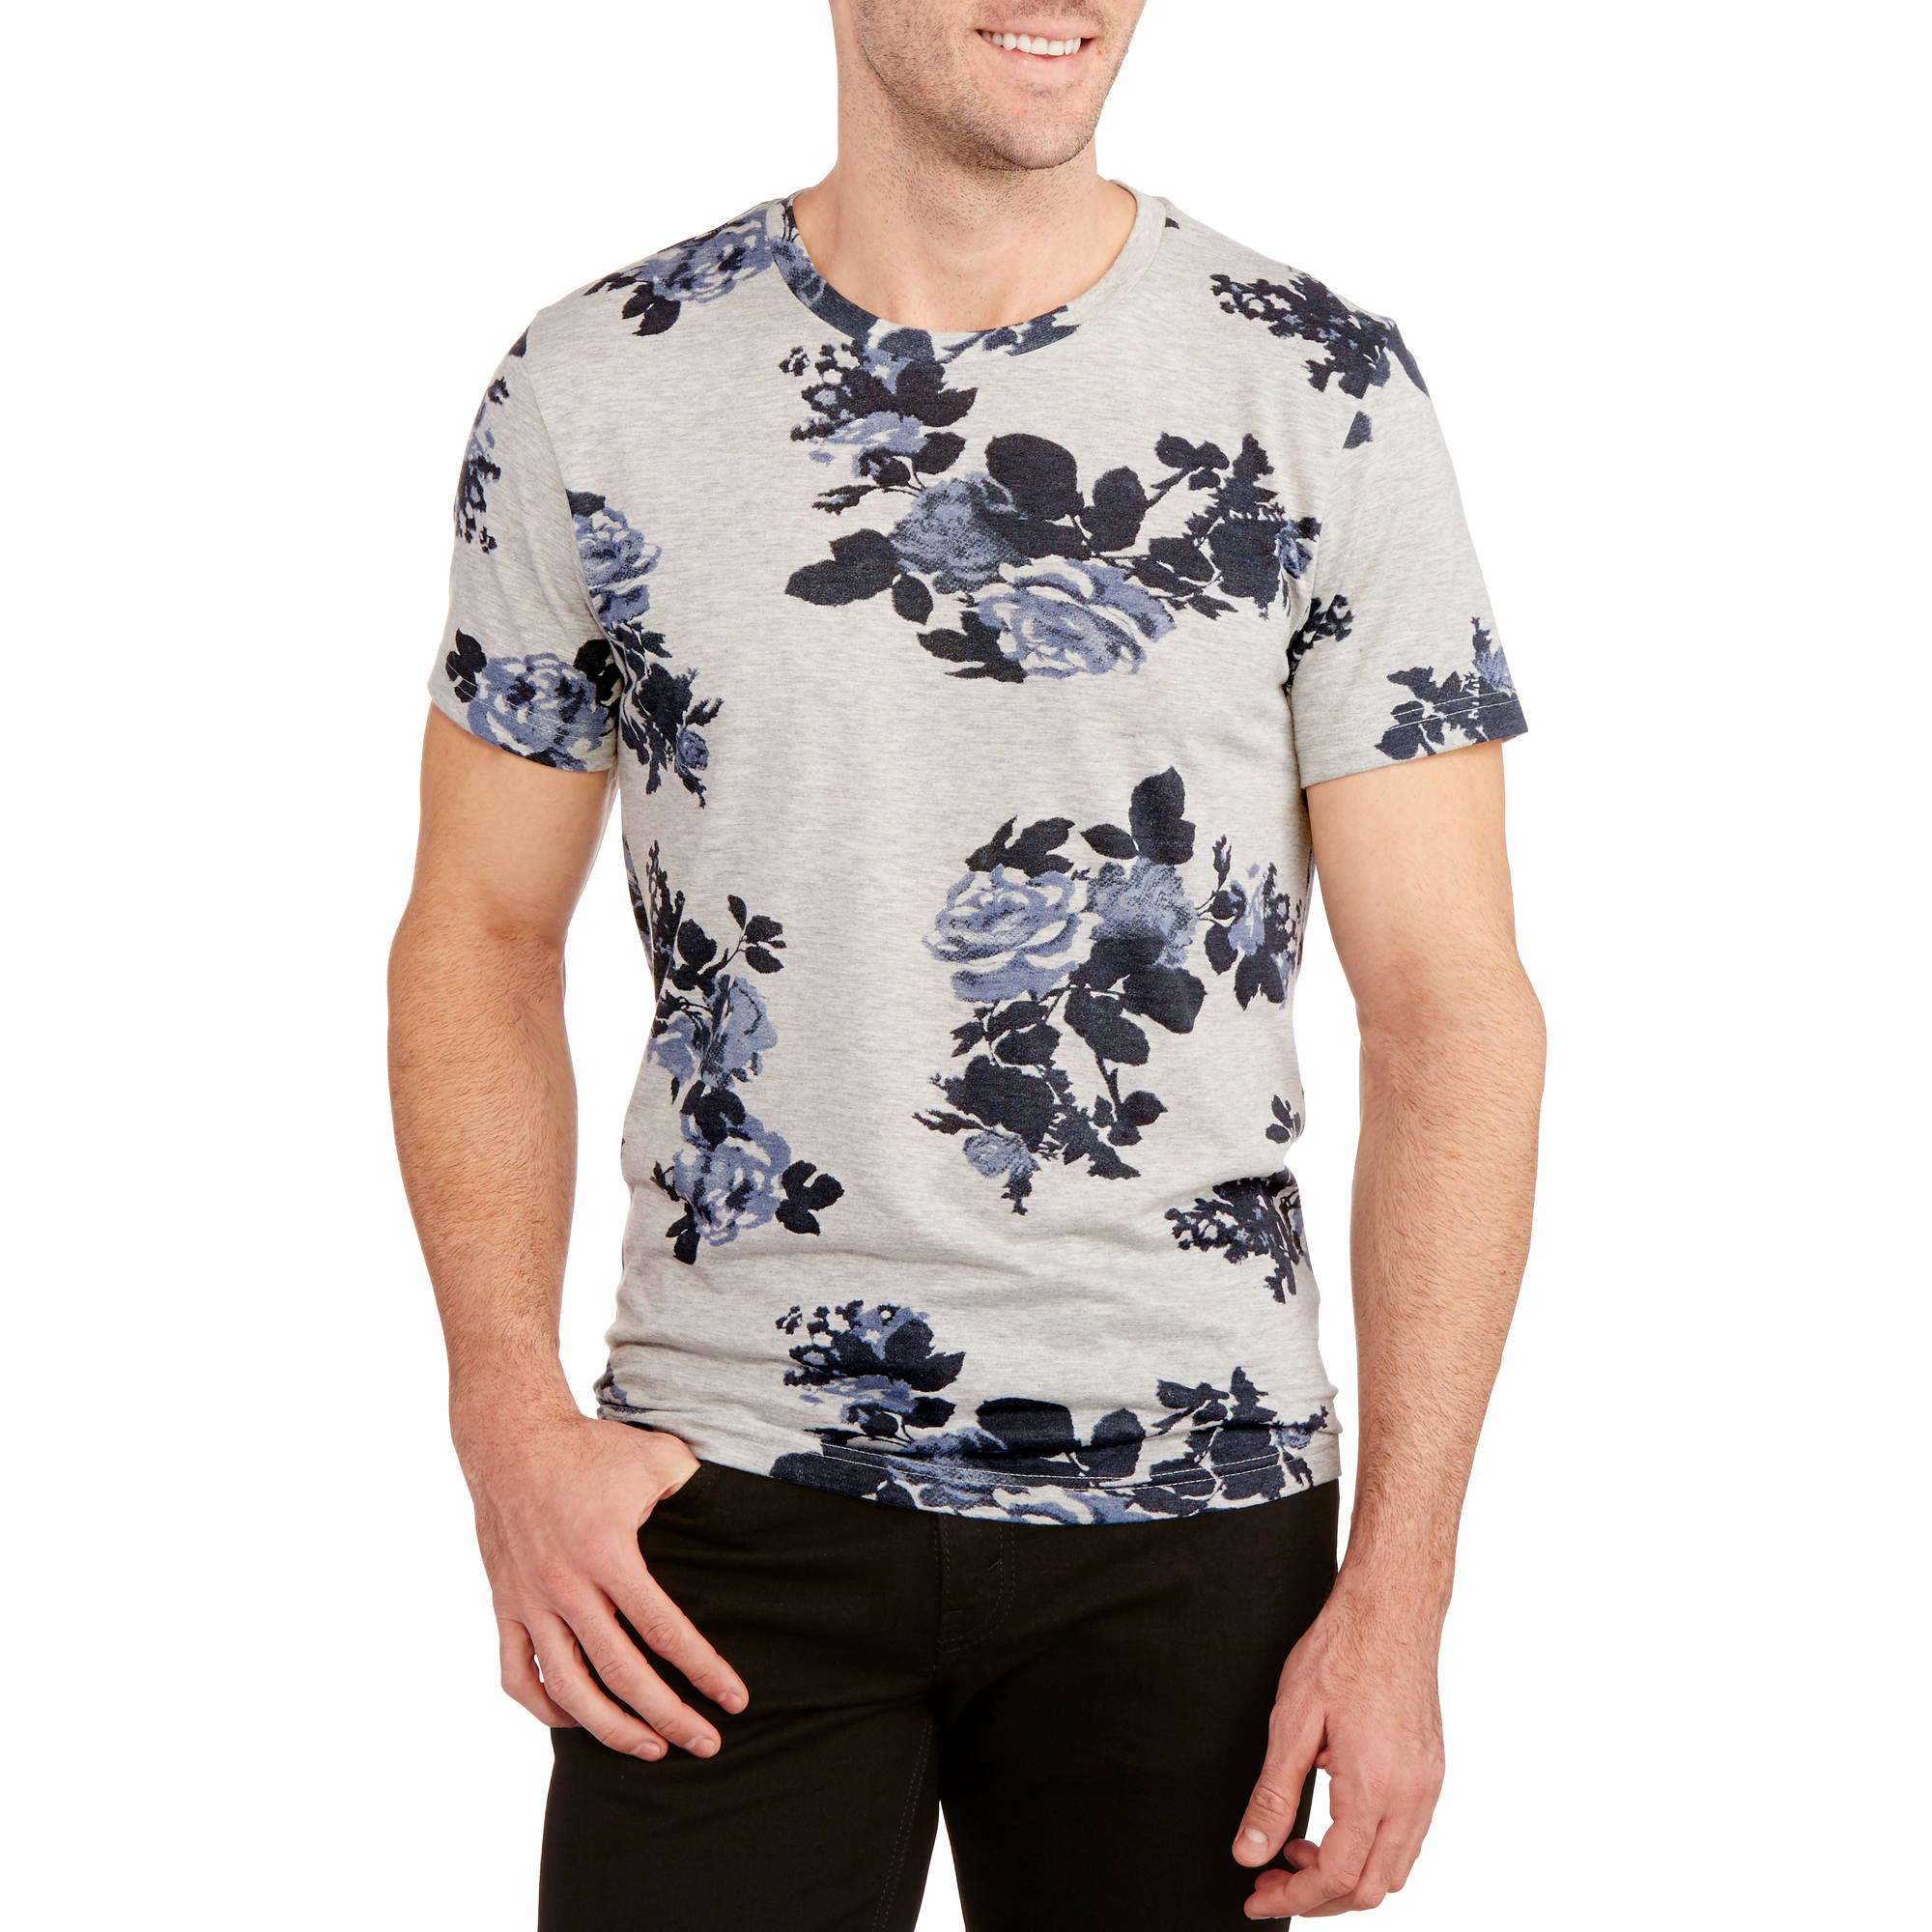 Floral Printed Men's Graphic Tee - image 1 of 2